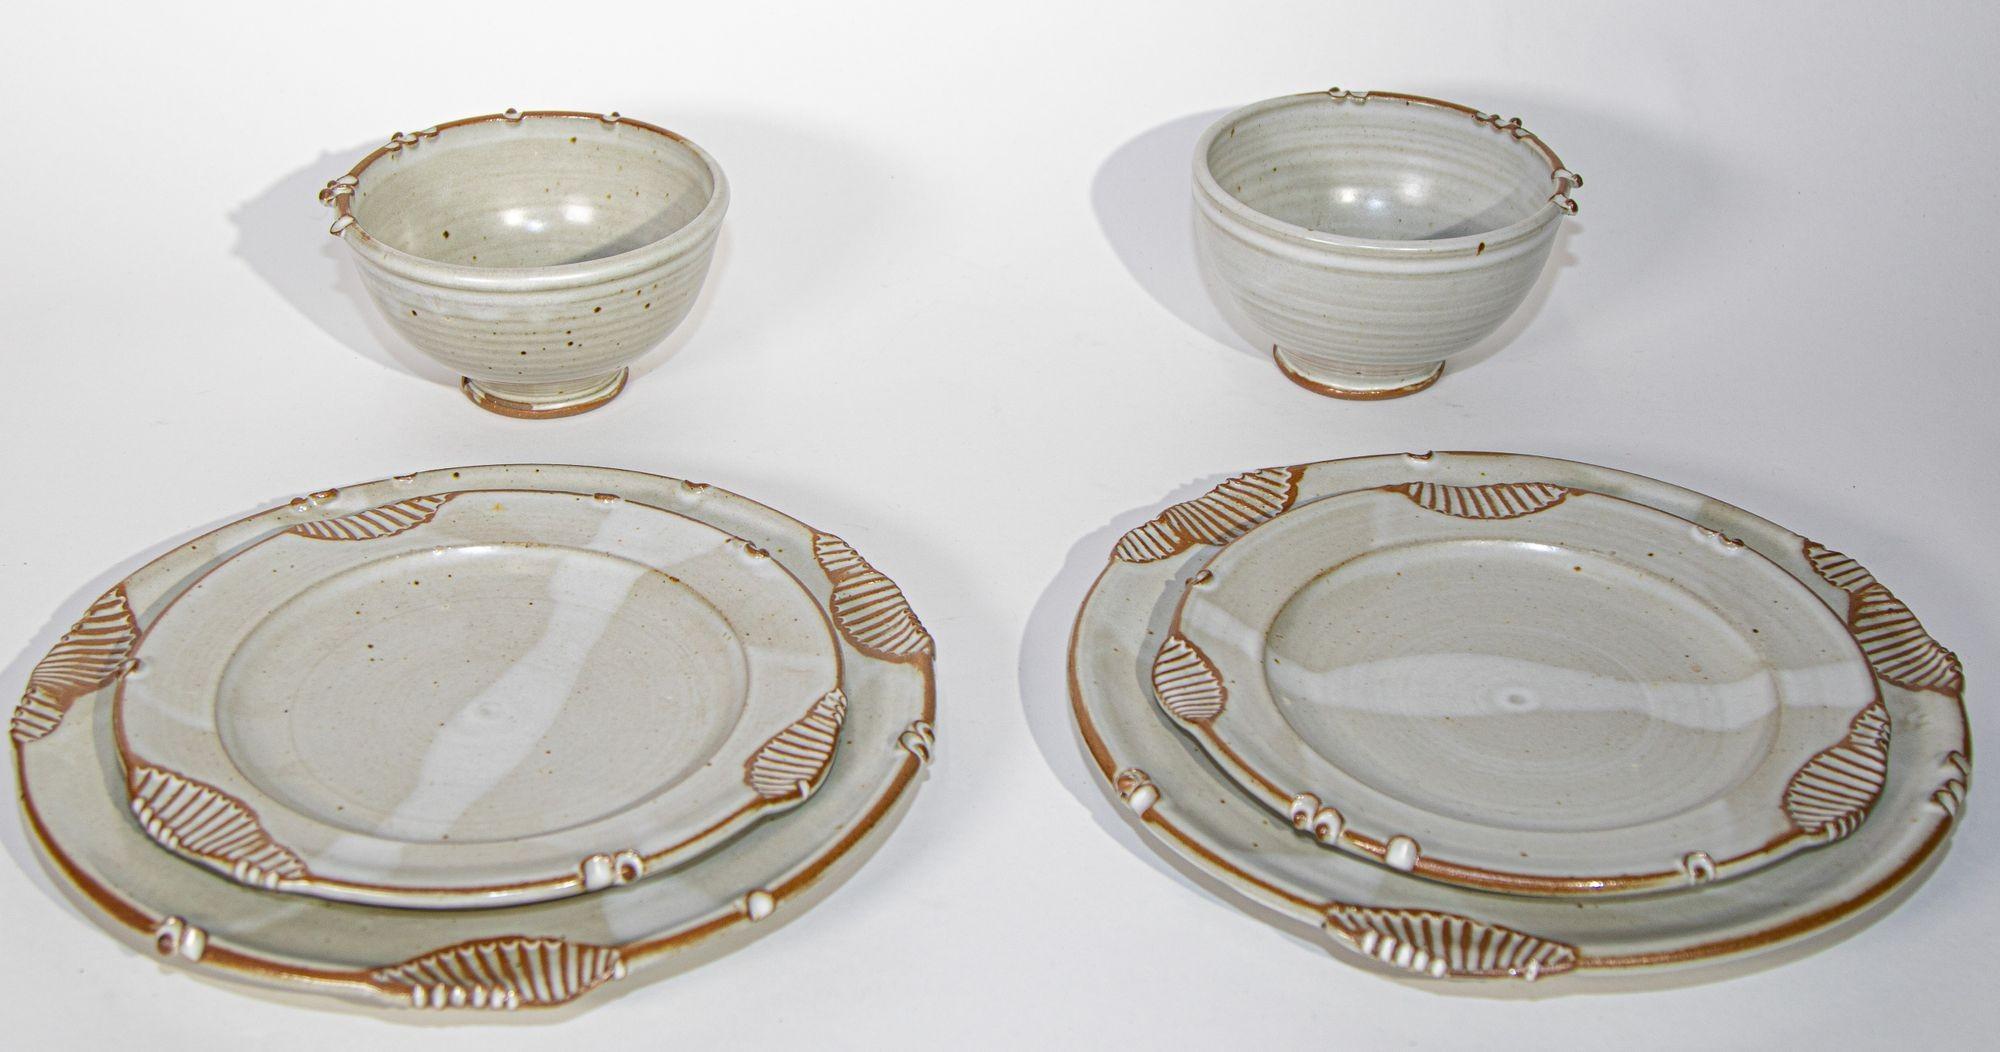 Paul Anthony Vintage Cream and Brown Stoneware Service Set of 6 For Sale 8